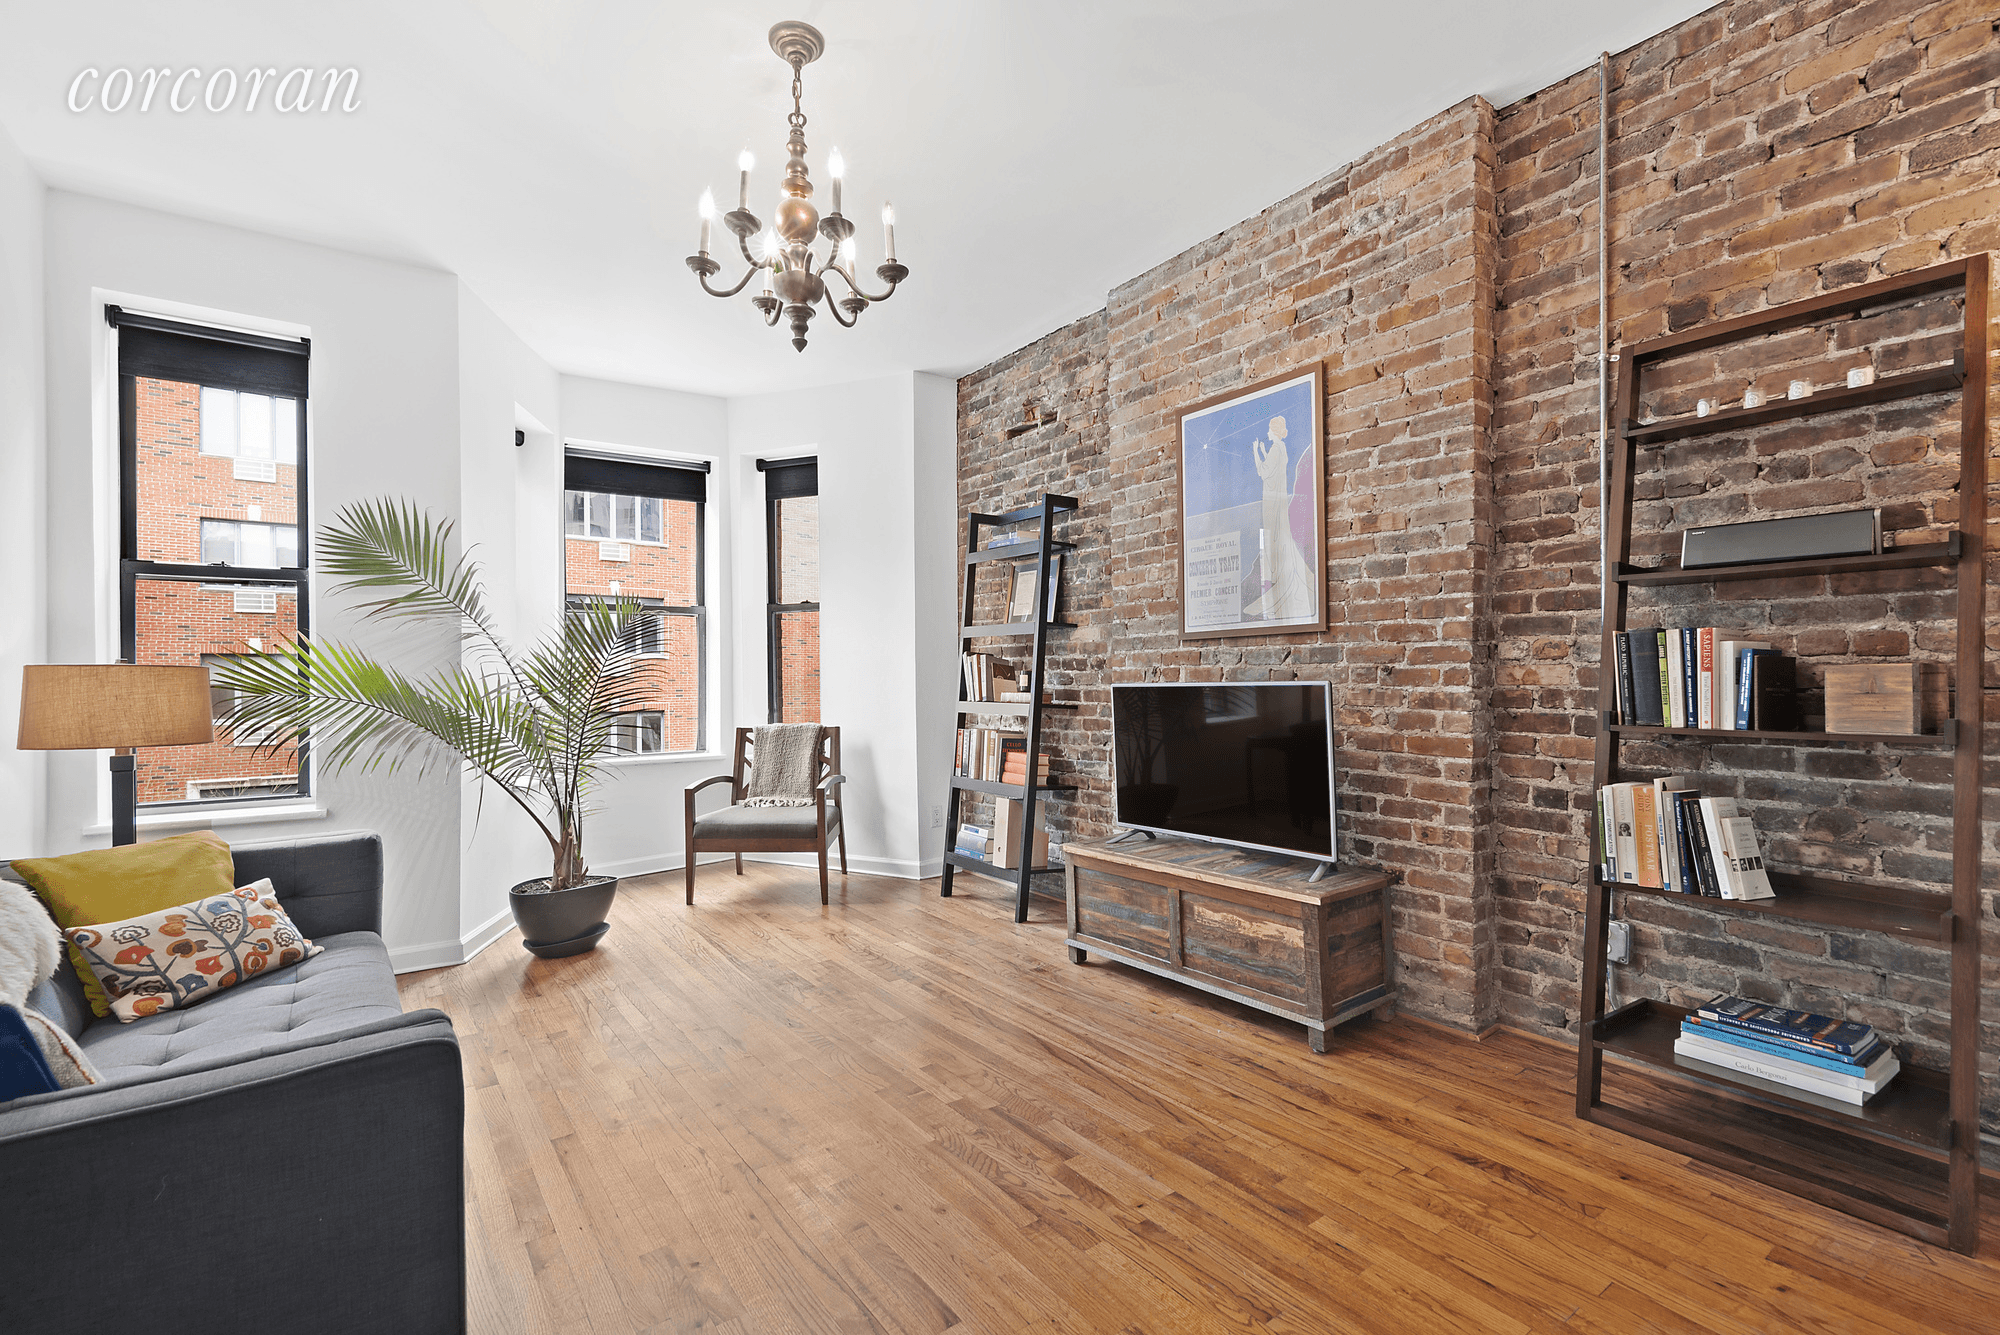 This sun filled one bedroom apartment in the heart of Park Slope is charming and chic.